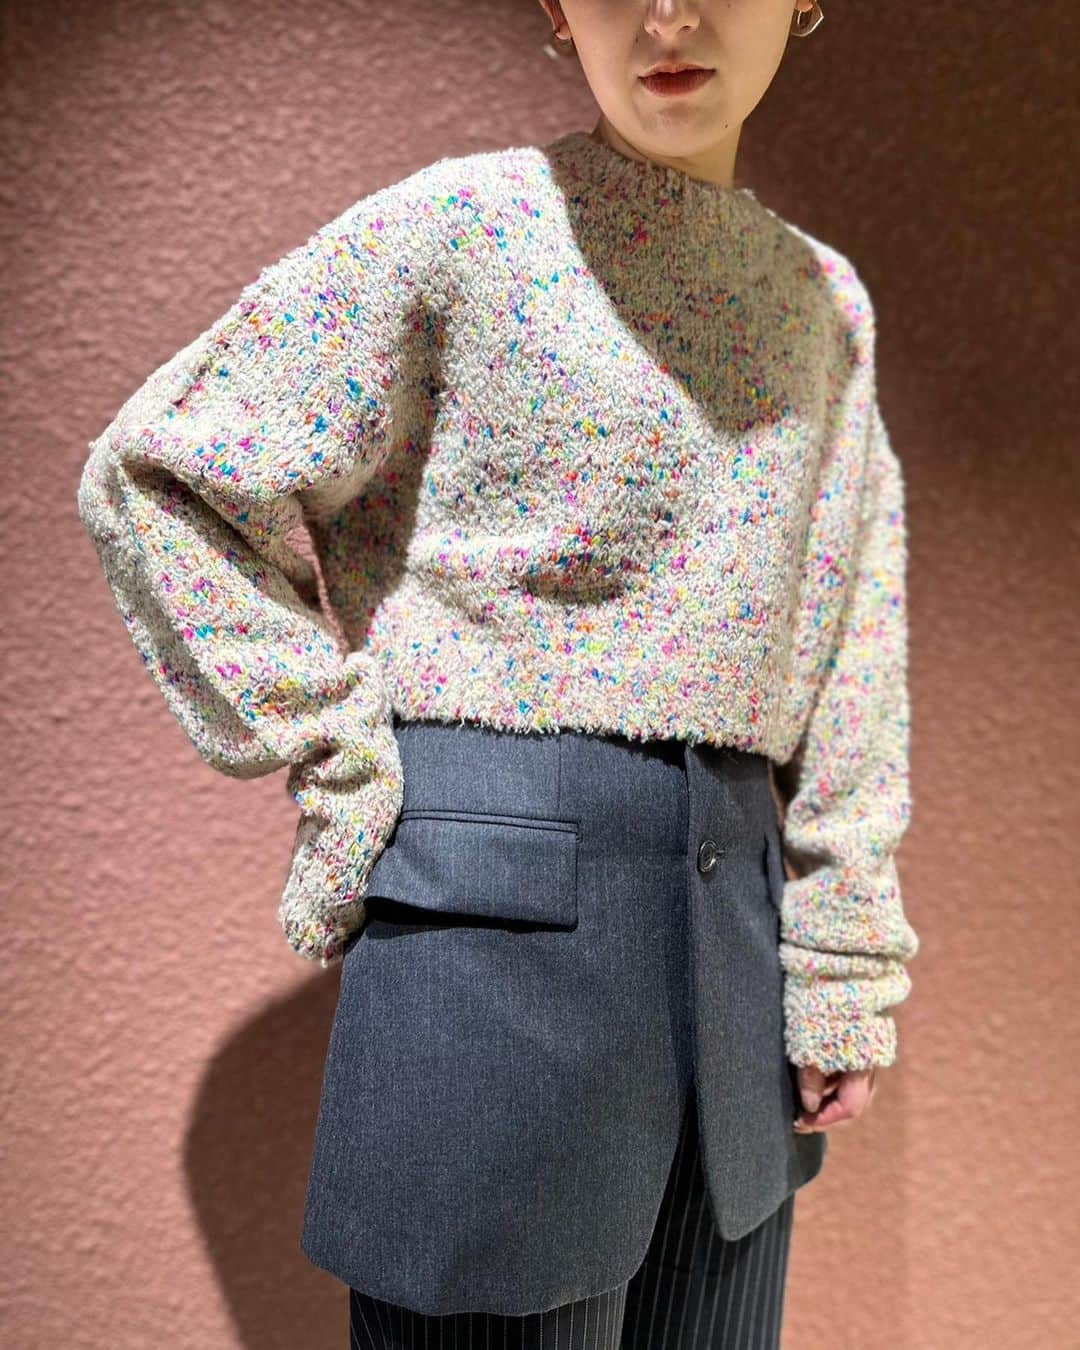 6(ROKU) OFFICIALのインスタグラム：「-  6 mulch slab crew neck knit ¥25,300- tax in  @inscrire_official skirt ¥53,900- tax in  @vansjapan ANAHEIM FACTORY AUTHENTIC ¥9,350- tax in  #roku #inscrire #vans #vansjapan」